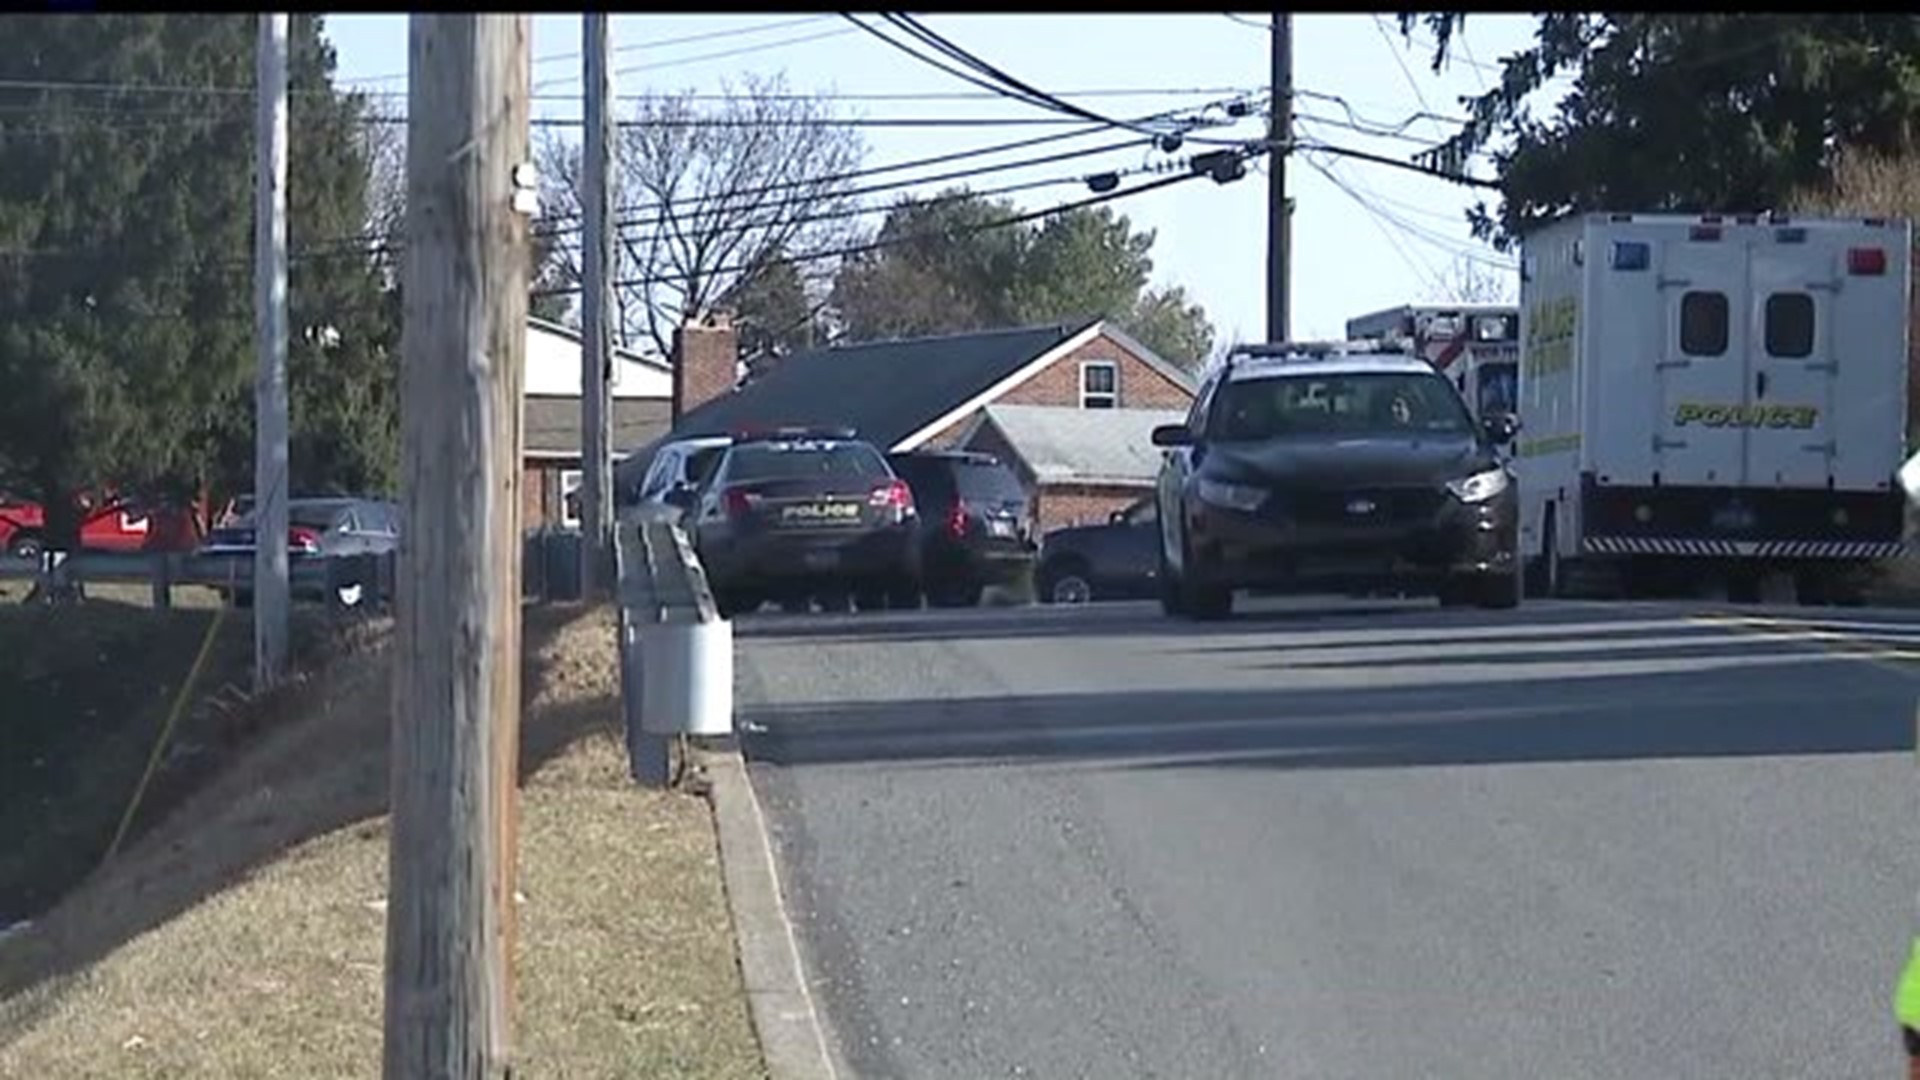 Police incident in Lower Paxton Twp., Dauphin County